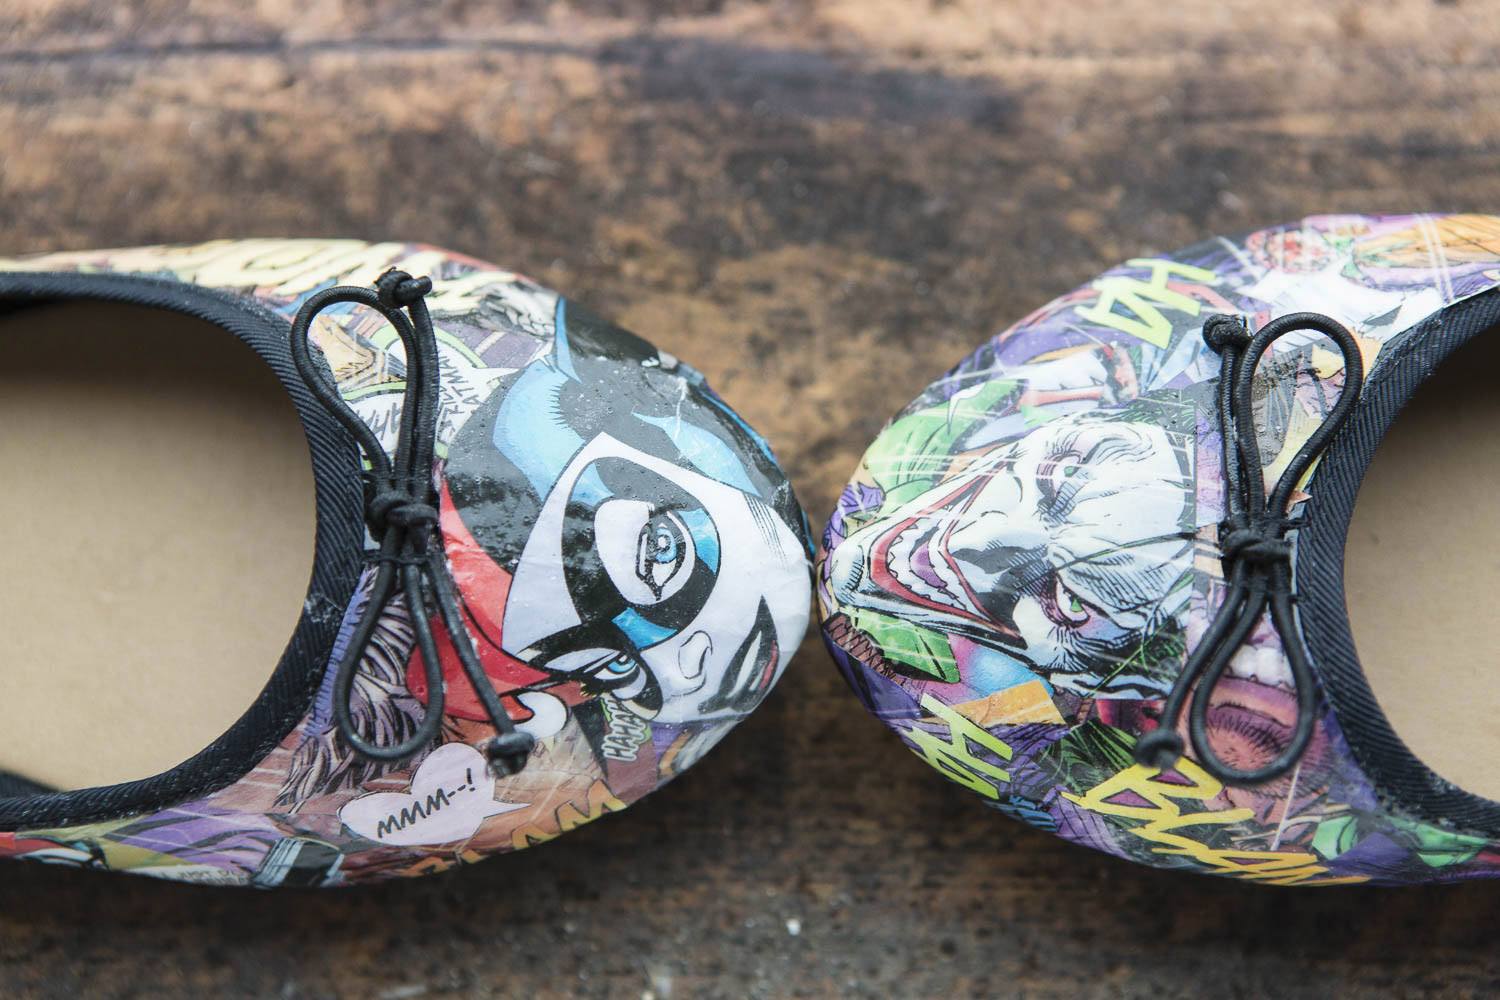 A close-up of the bride's customized wedding shoes adorned with comic book pages.